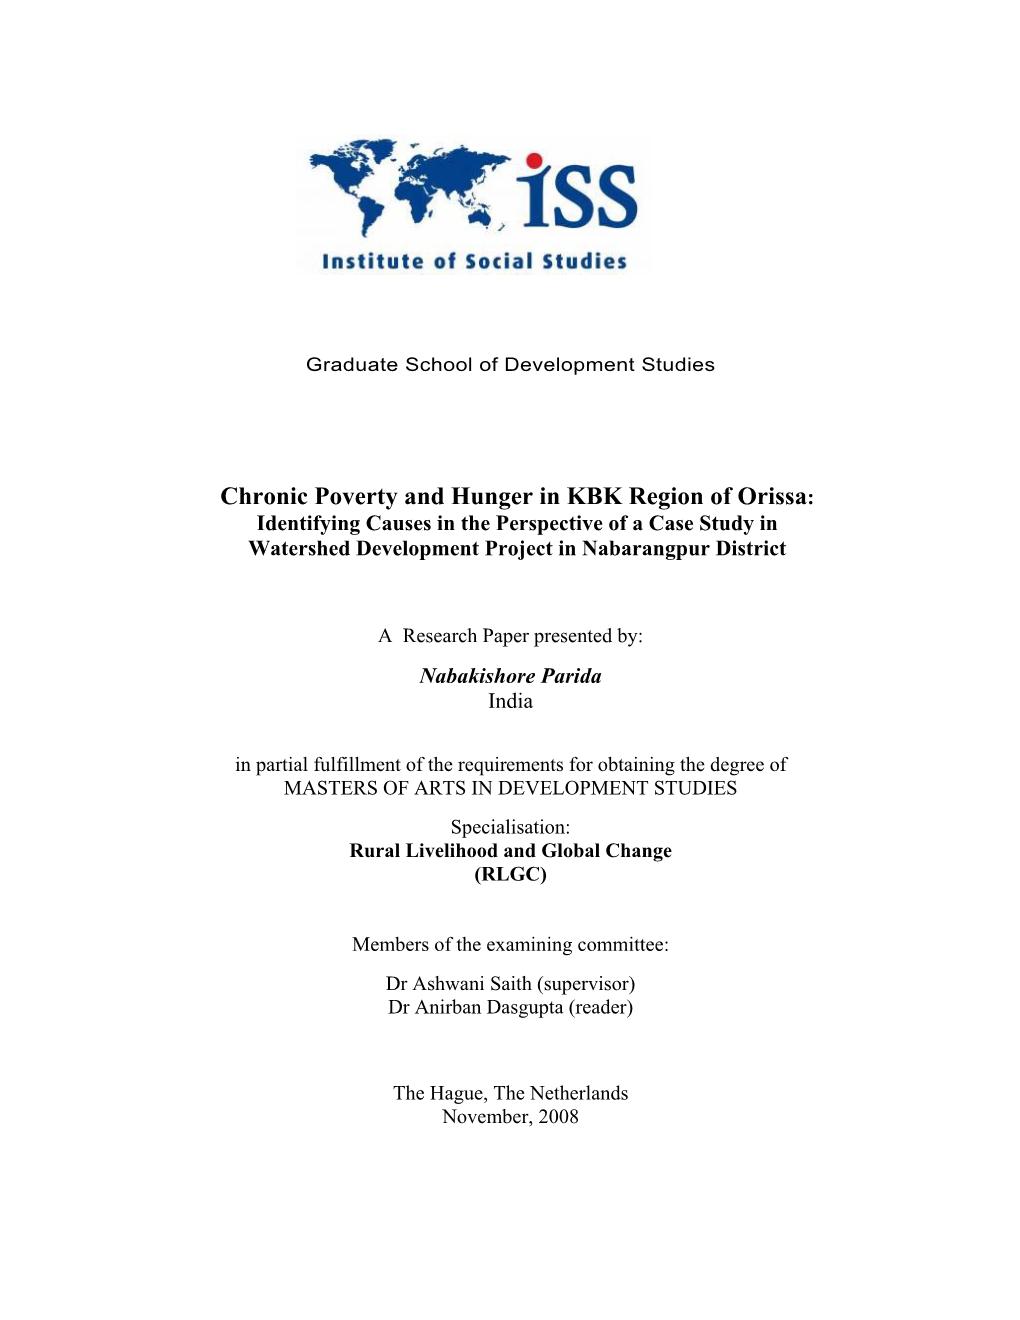 Chronic Poverty and Hunger in KBK Region of Orissa: Identifying Causes in the Perspective of a Case Study in Watershed Development Project in Nabarangpur District